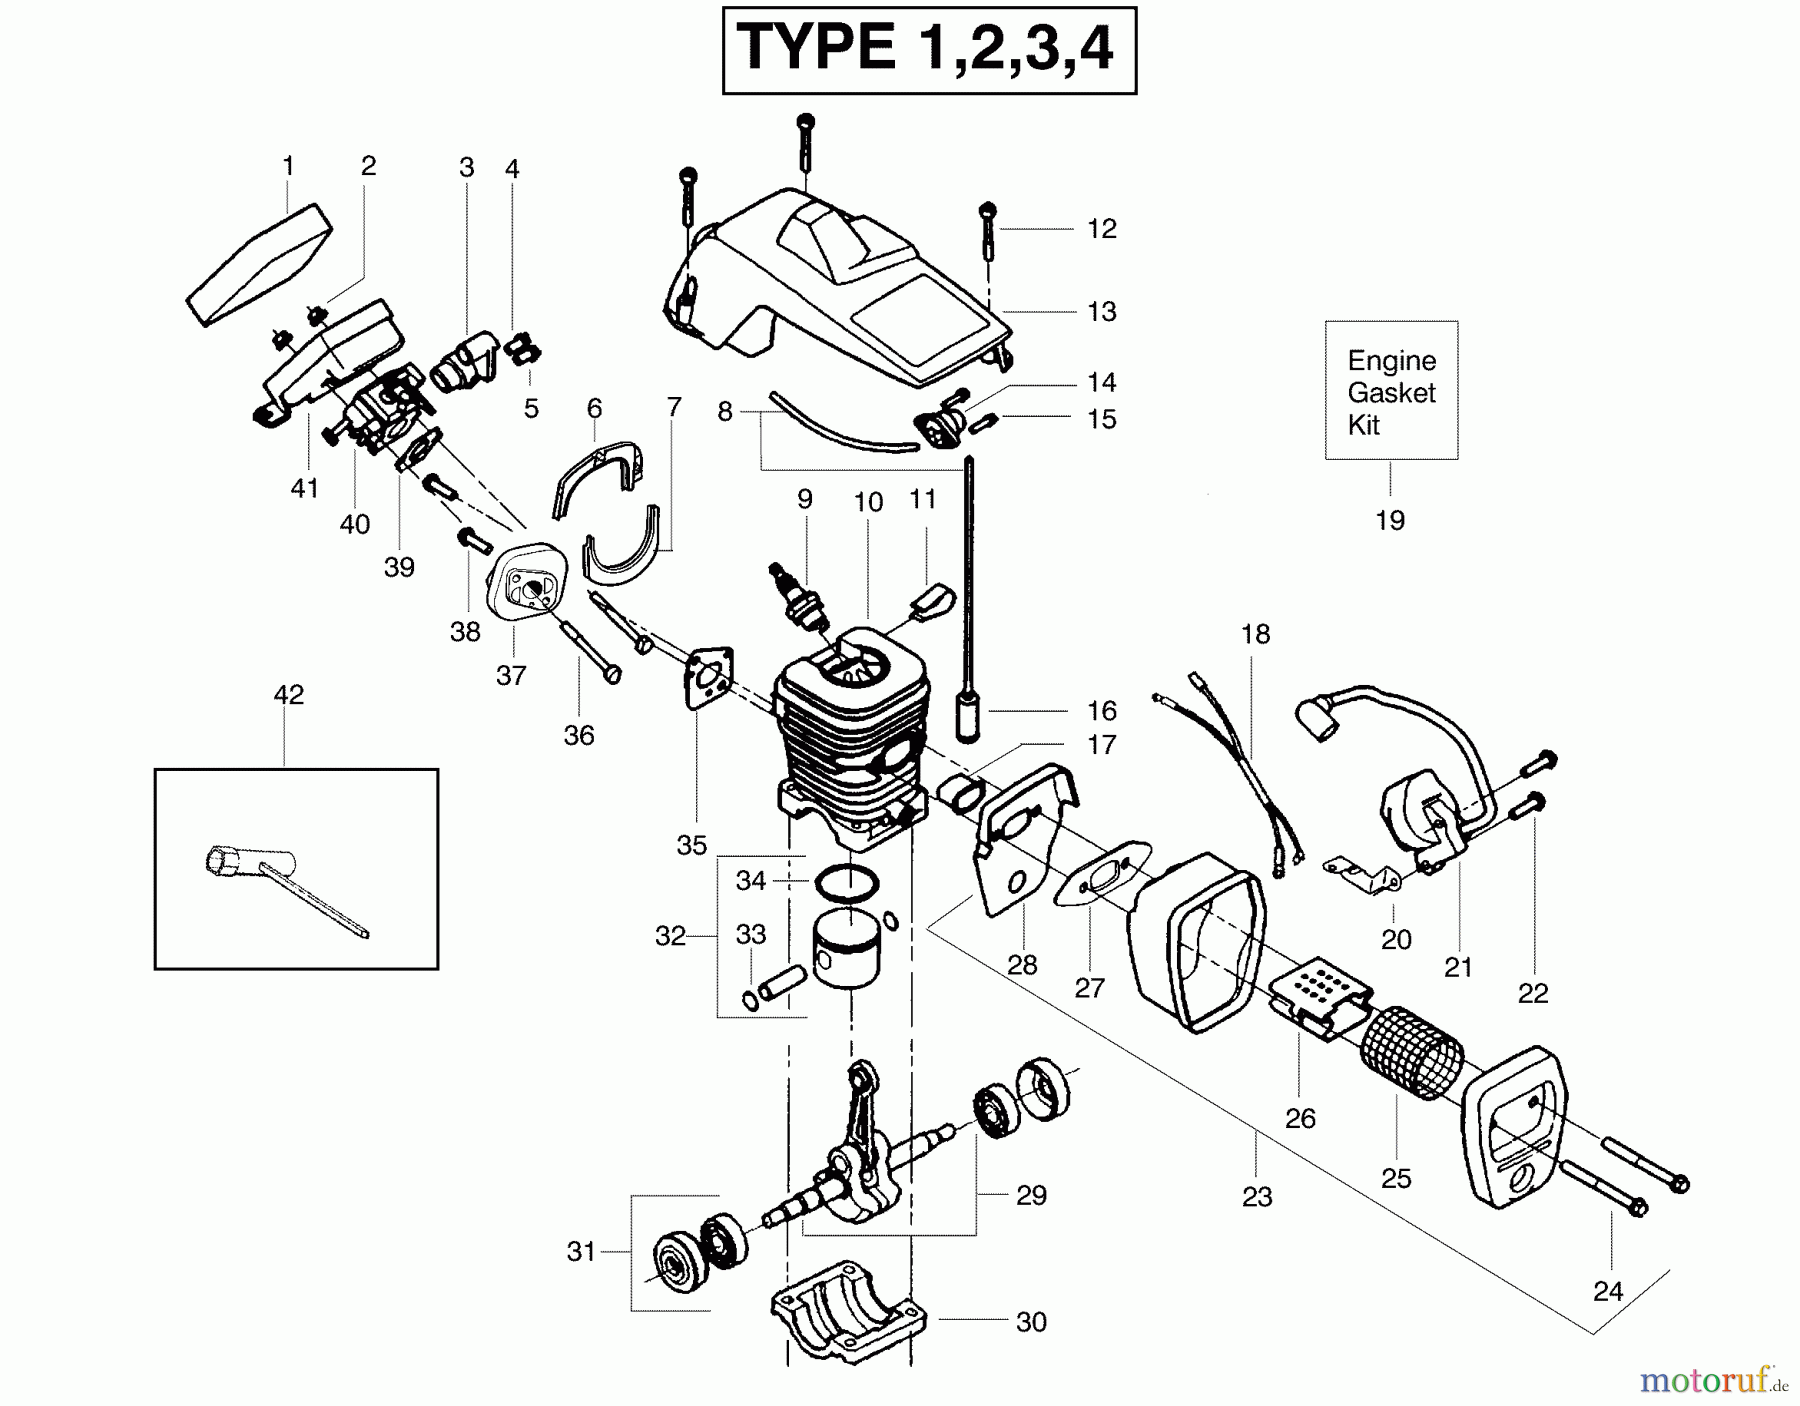  Poulan / Weed Eater Motorsägen 2075 (Type 1) - Poulan Chainsaw Engine Assembly Type 1, 2, 3, 4